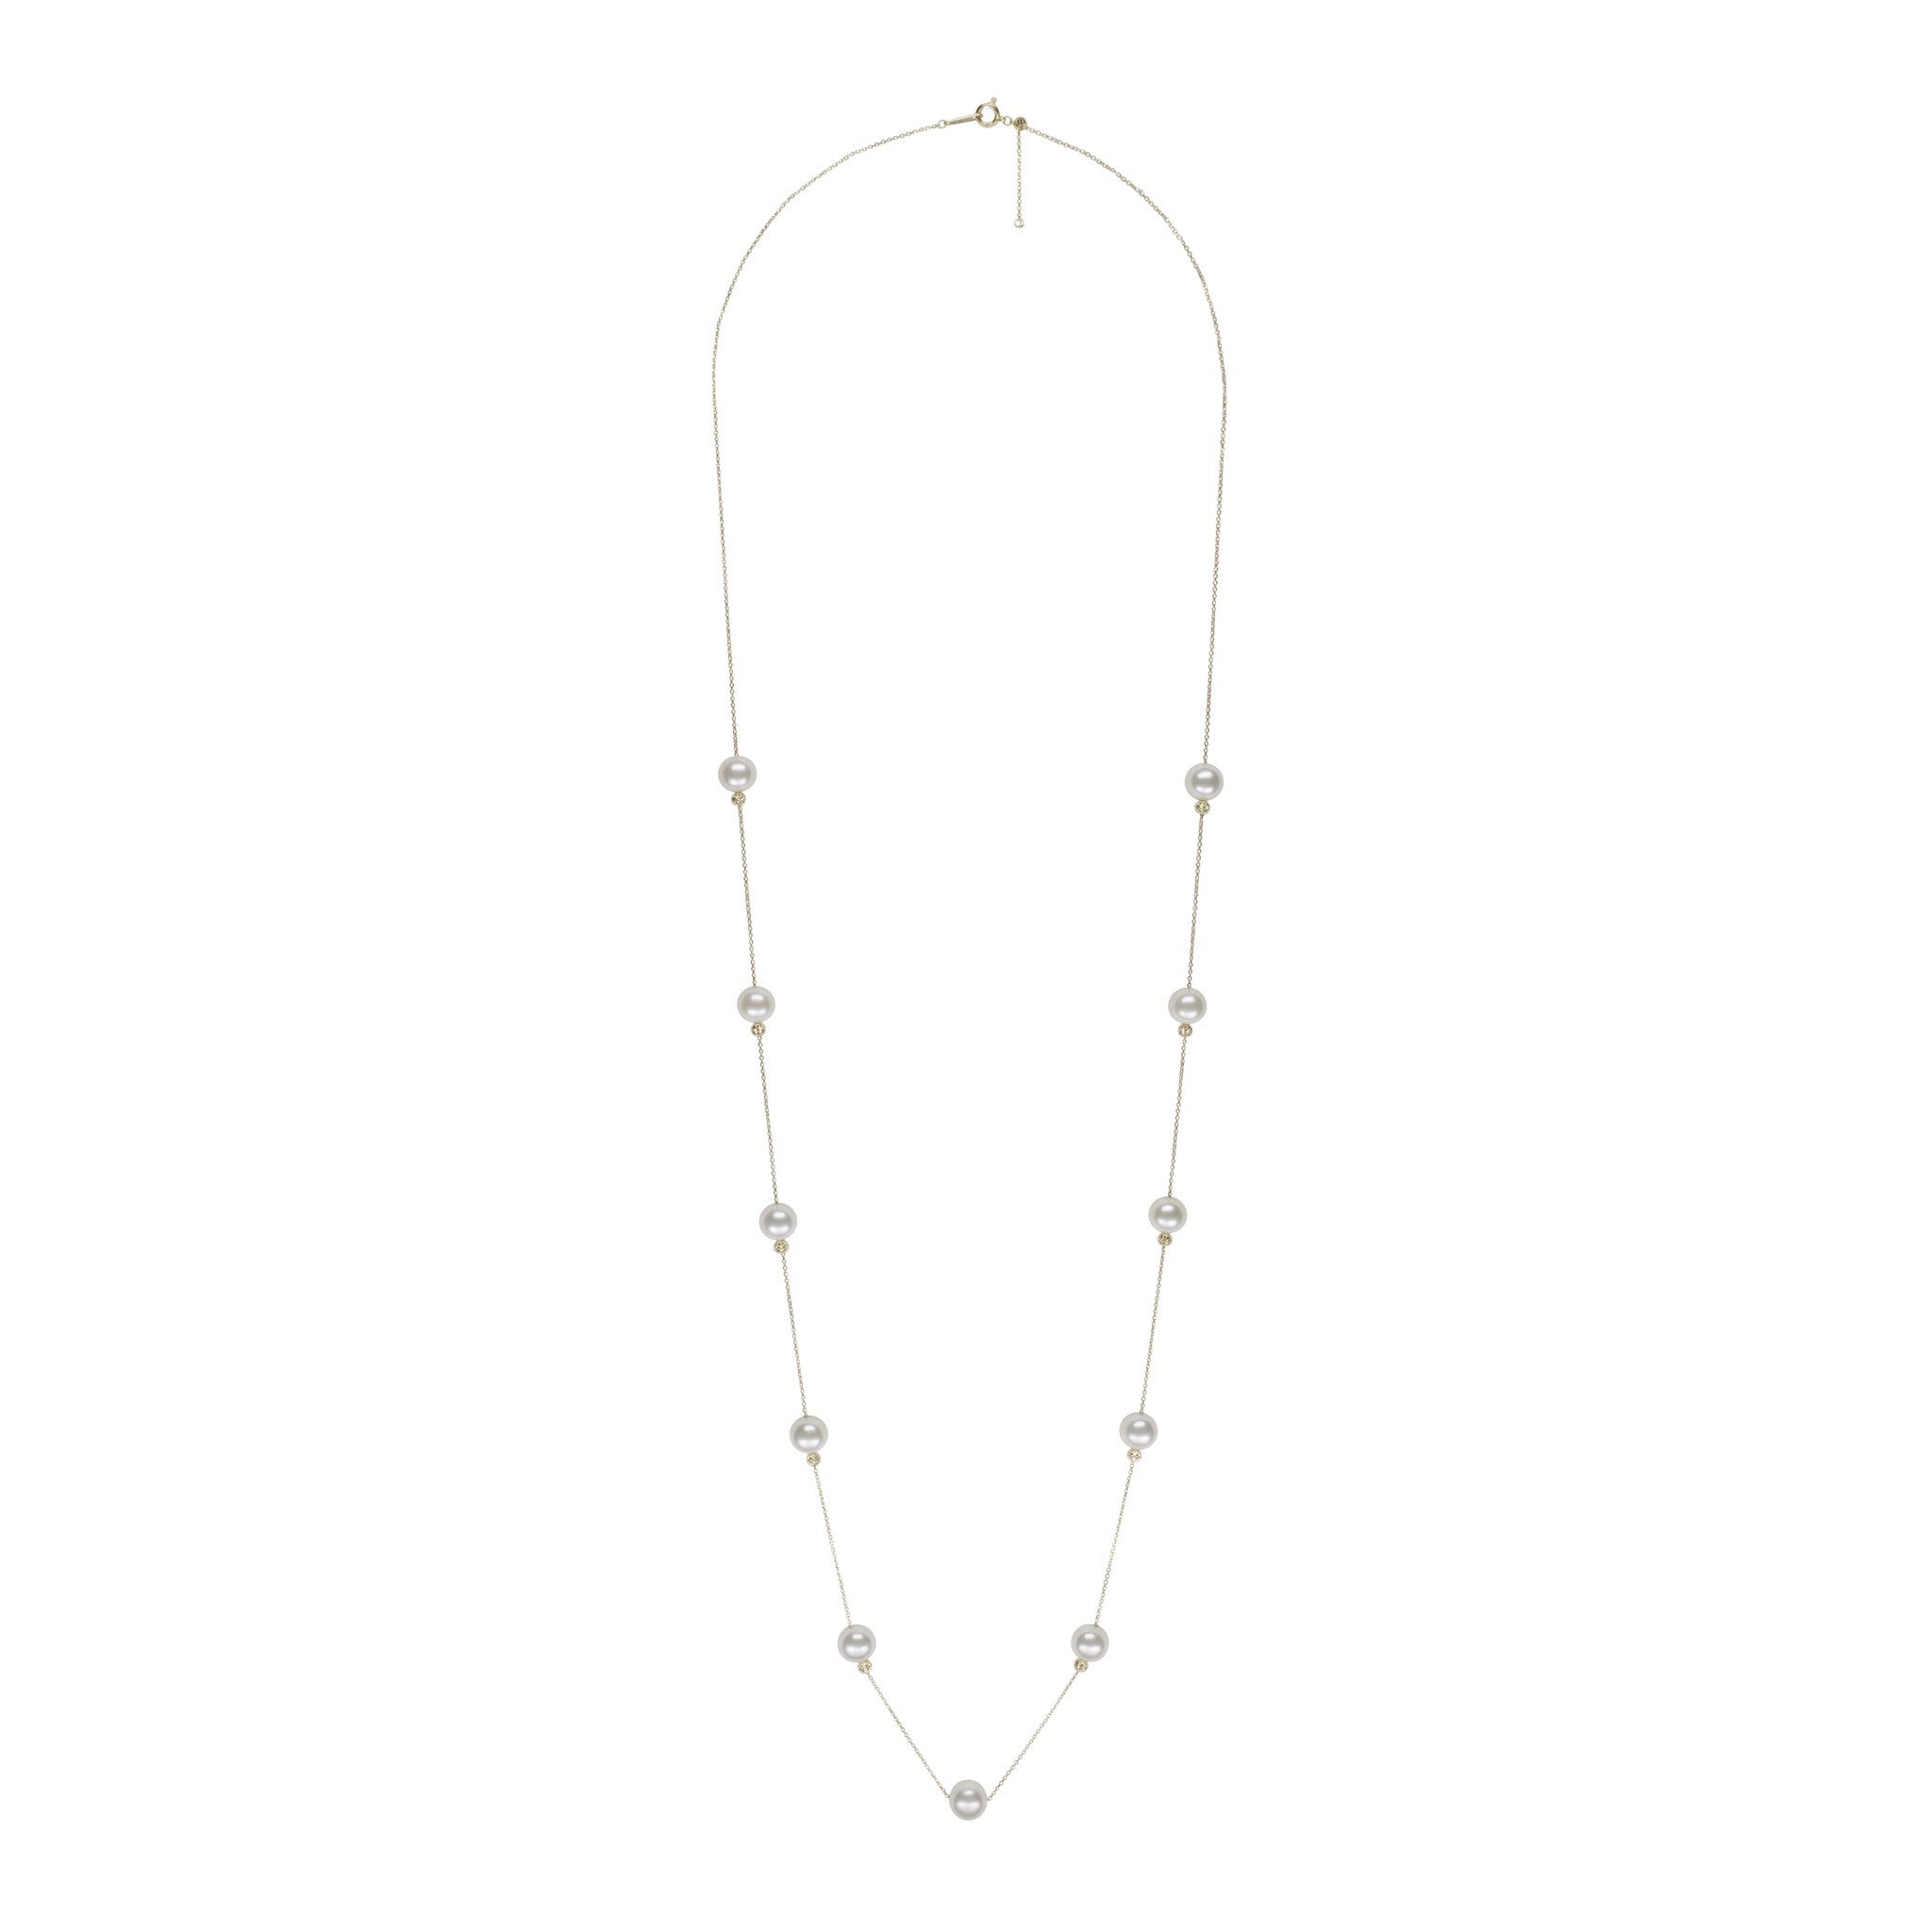 Petite Symmetrical Adjustable Necklace – Pearls By Shari